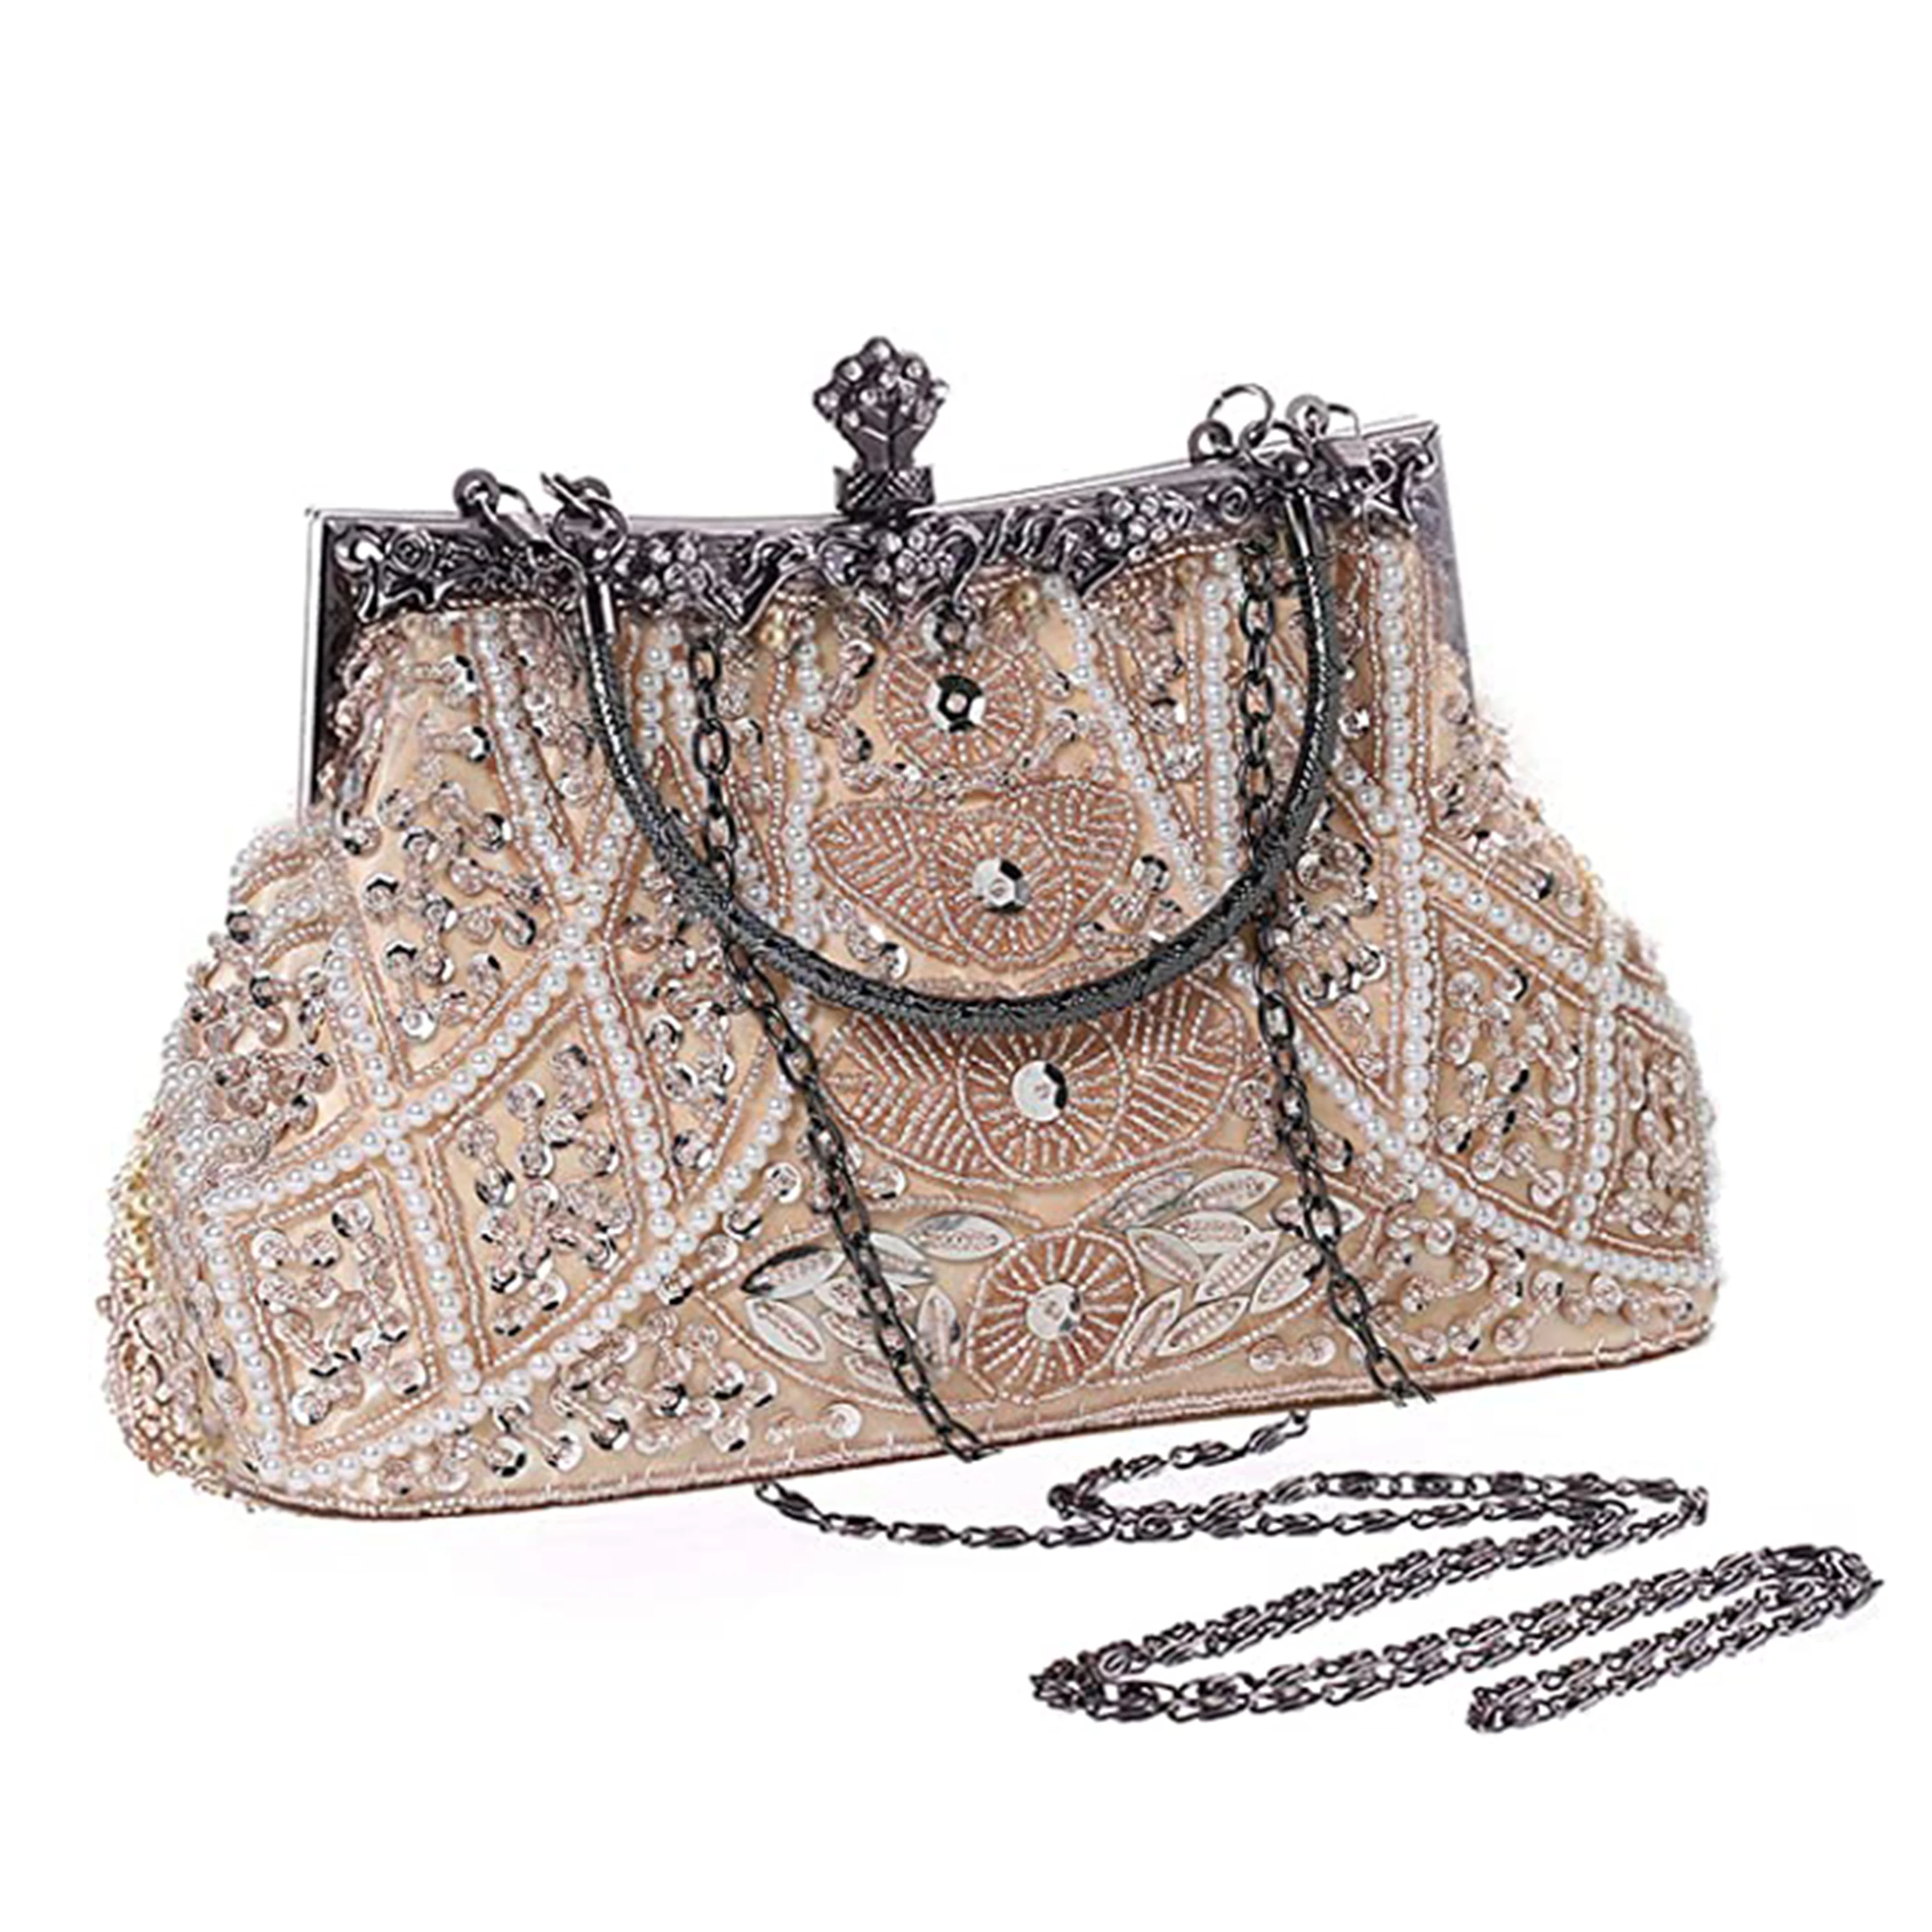 1920s Vintage Beaded Clutch Evening Bags Flapper Handbag Clutch for Women  Formal Wedding 1920s Party Accessories